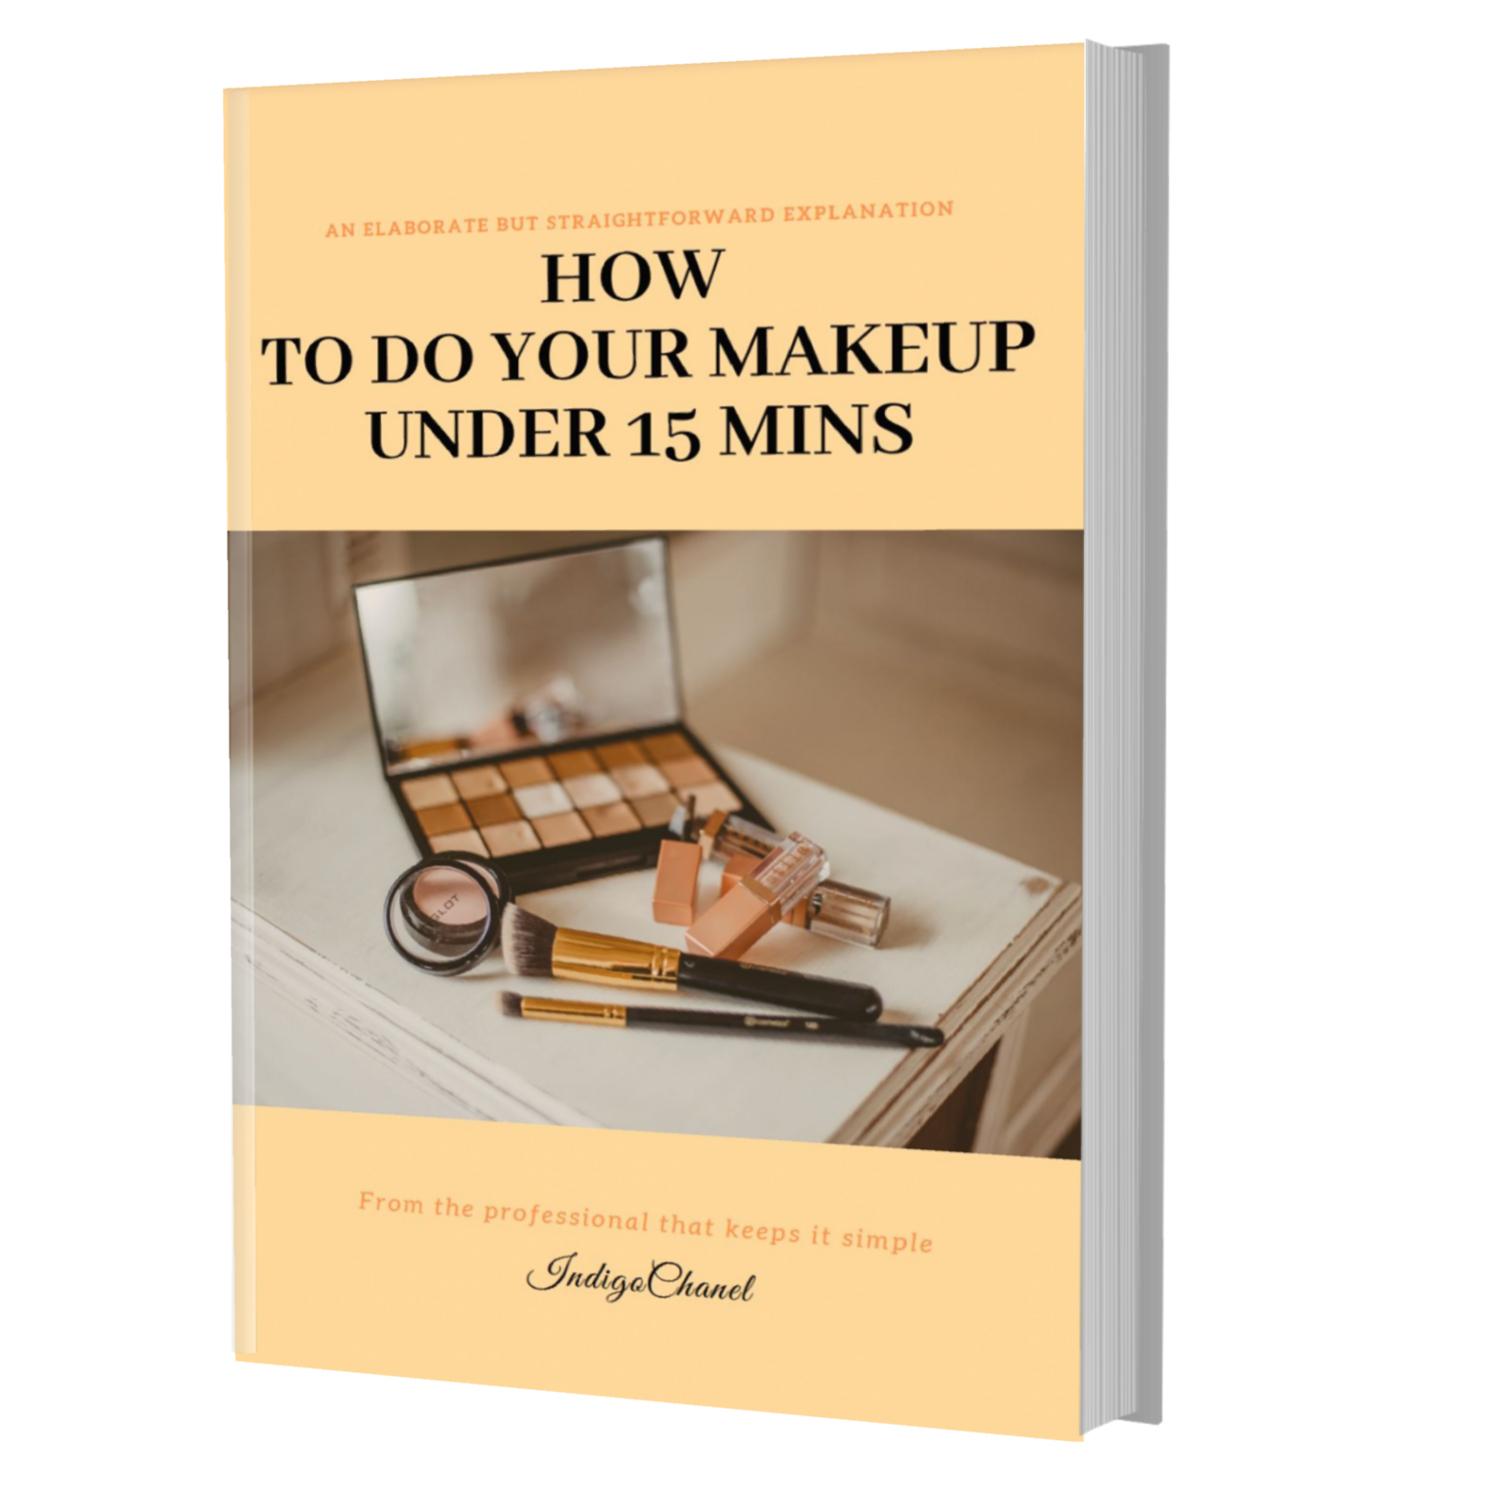 How To Do Your Makeup In under 15 Minutes